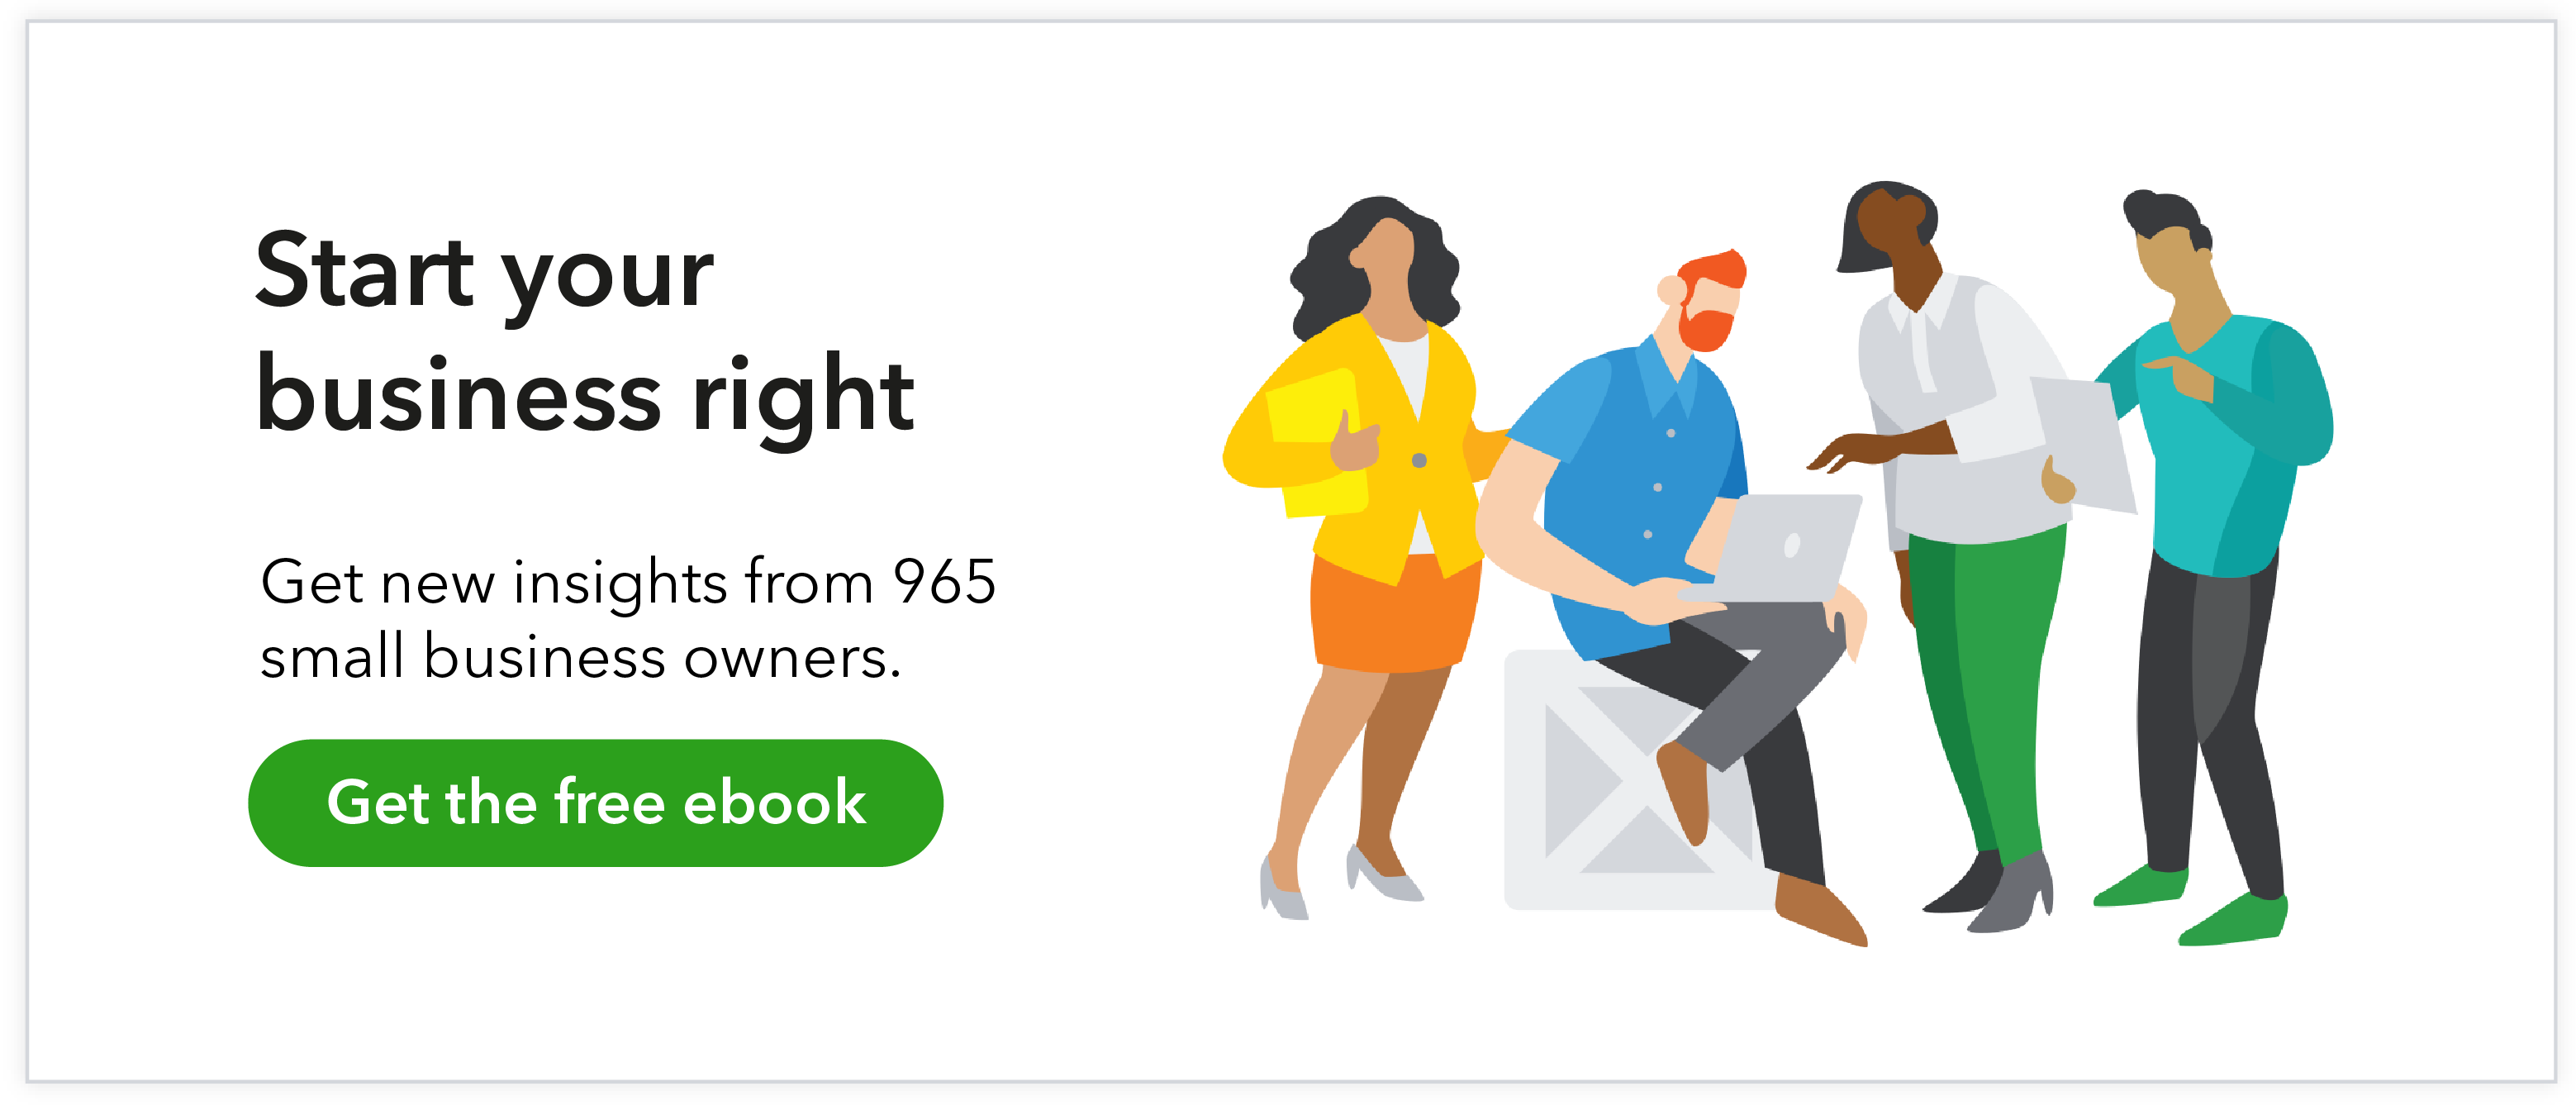 Start your business right. Get new insights from 965 small business owners.